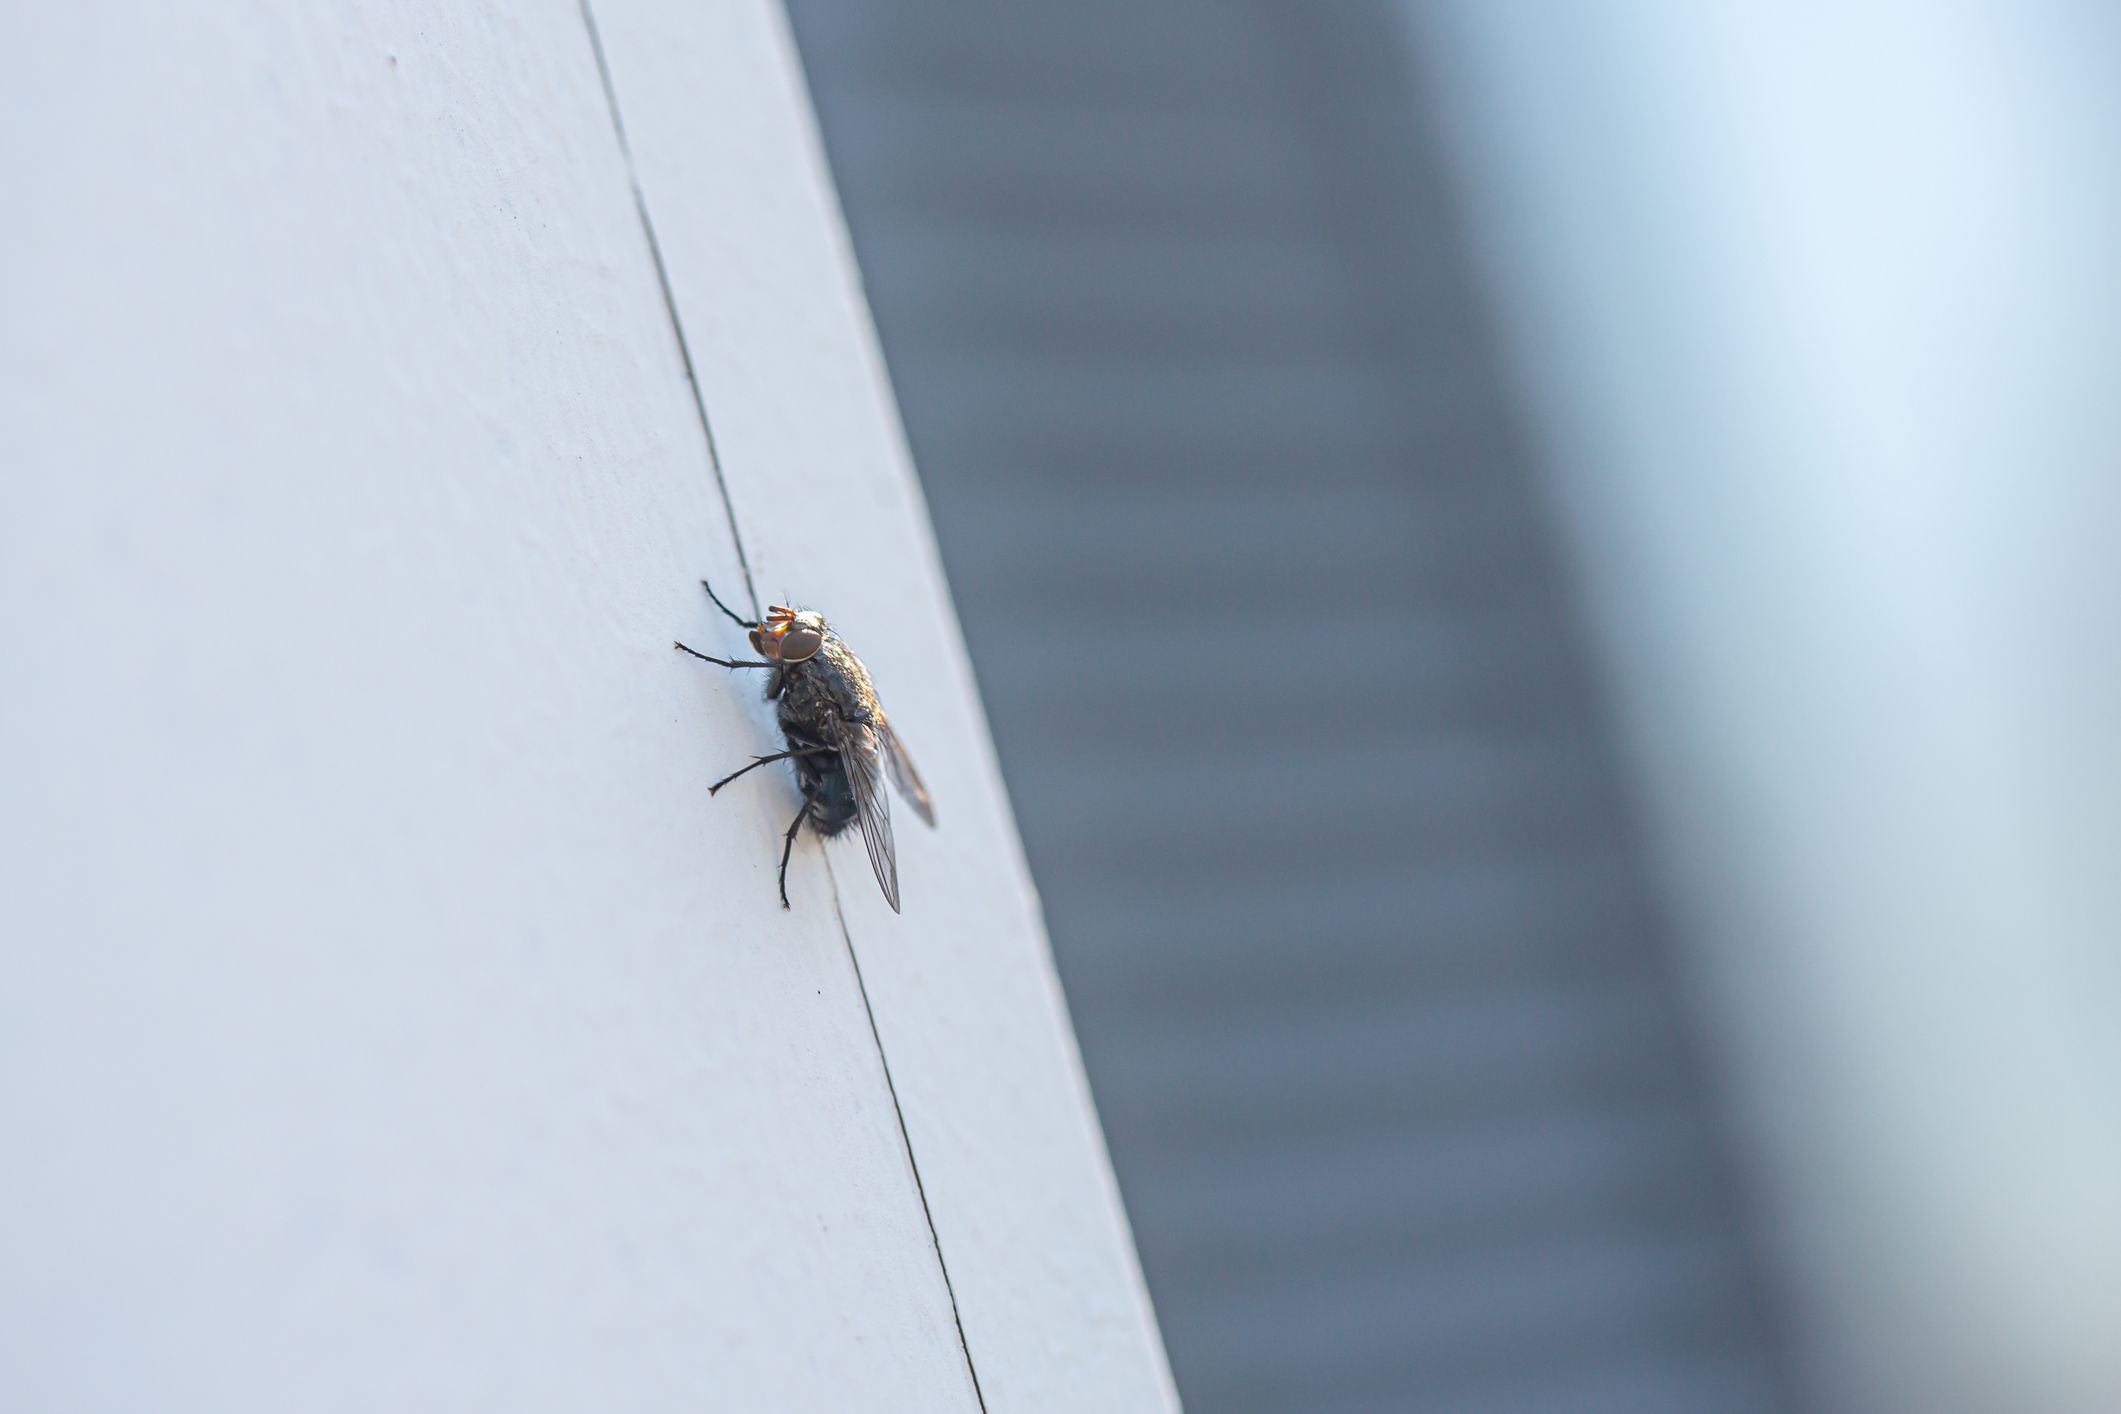 How to Get Rid of Houseflies at Home Naturally